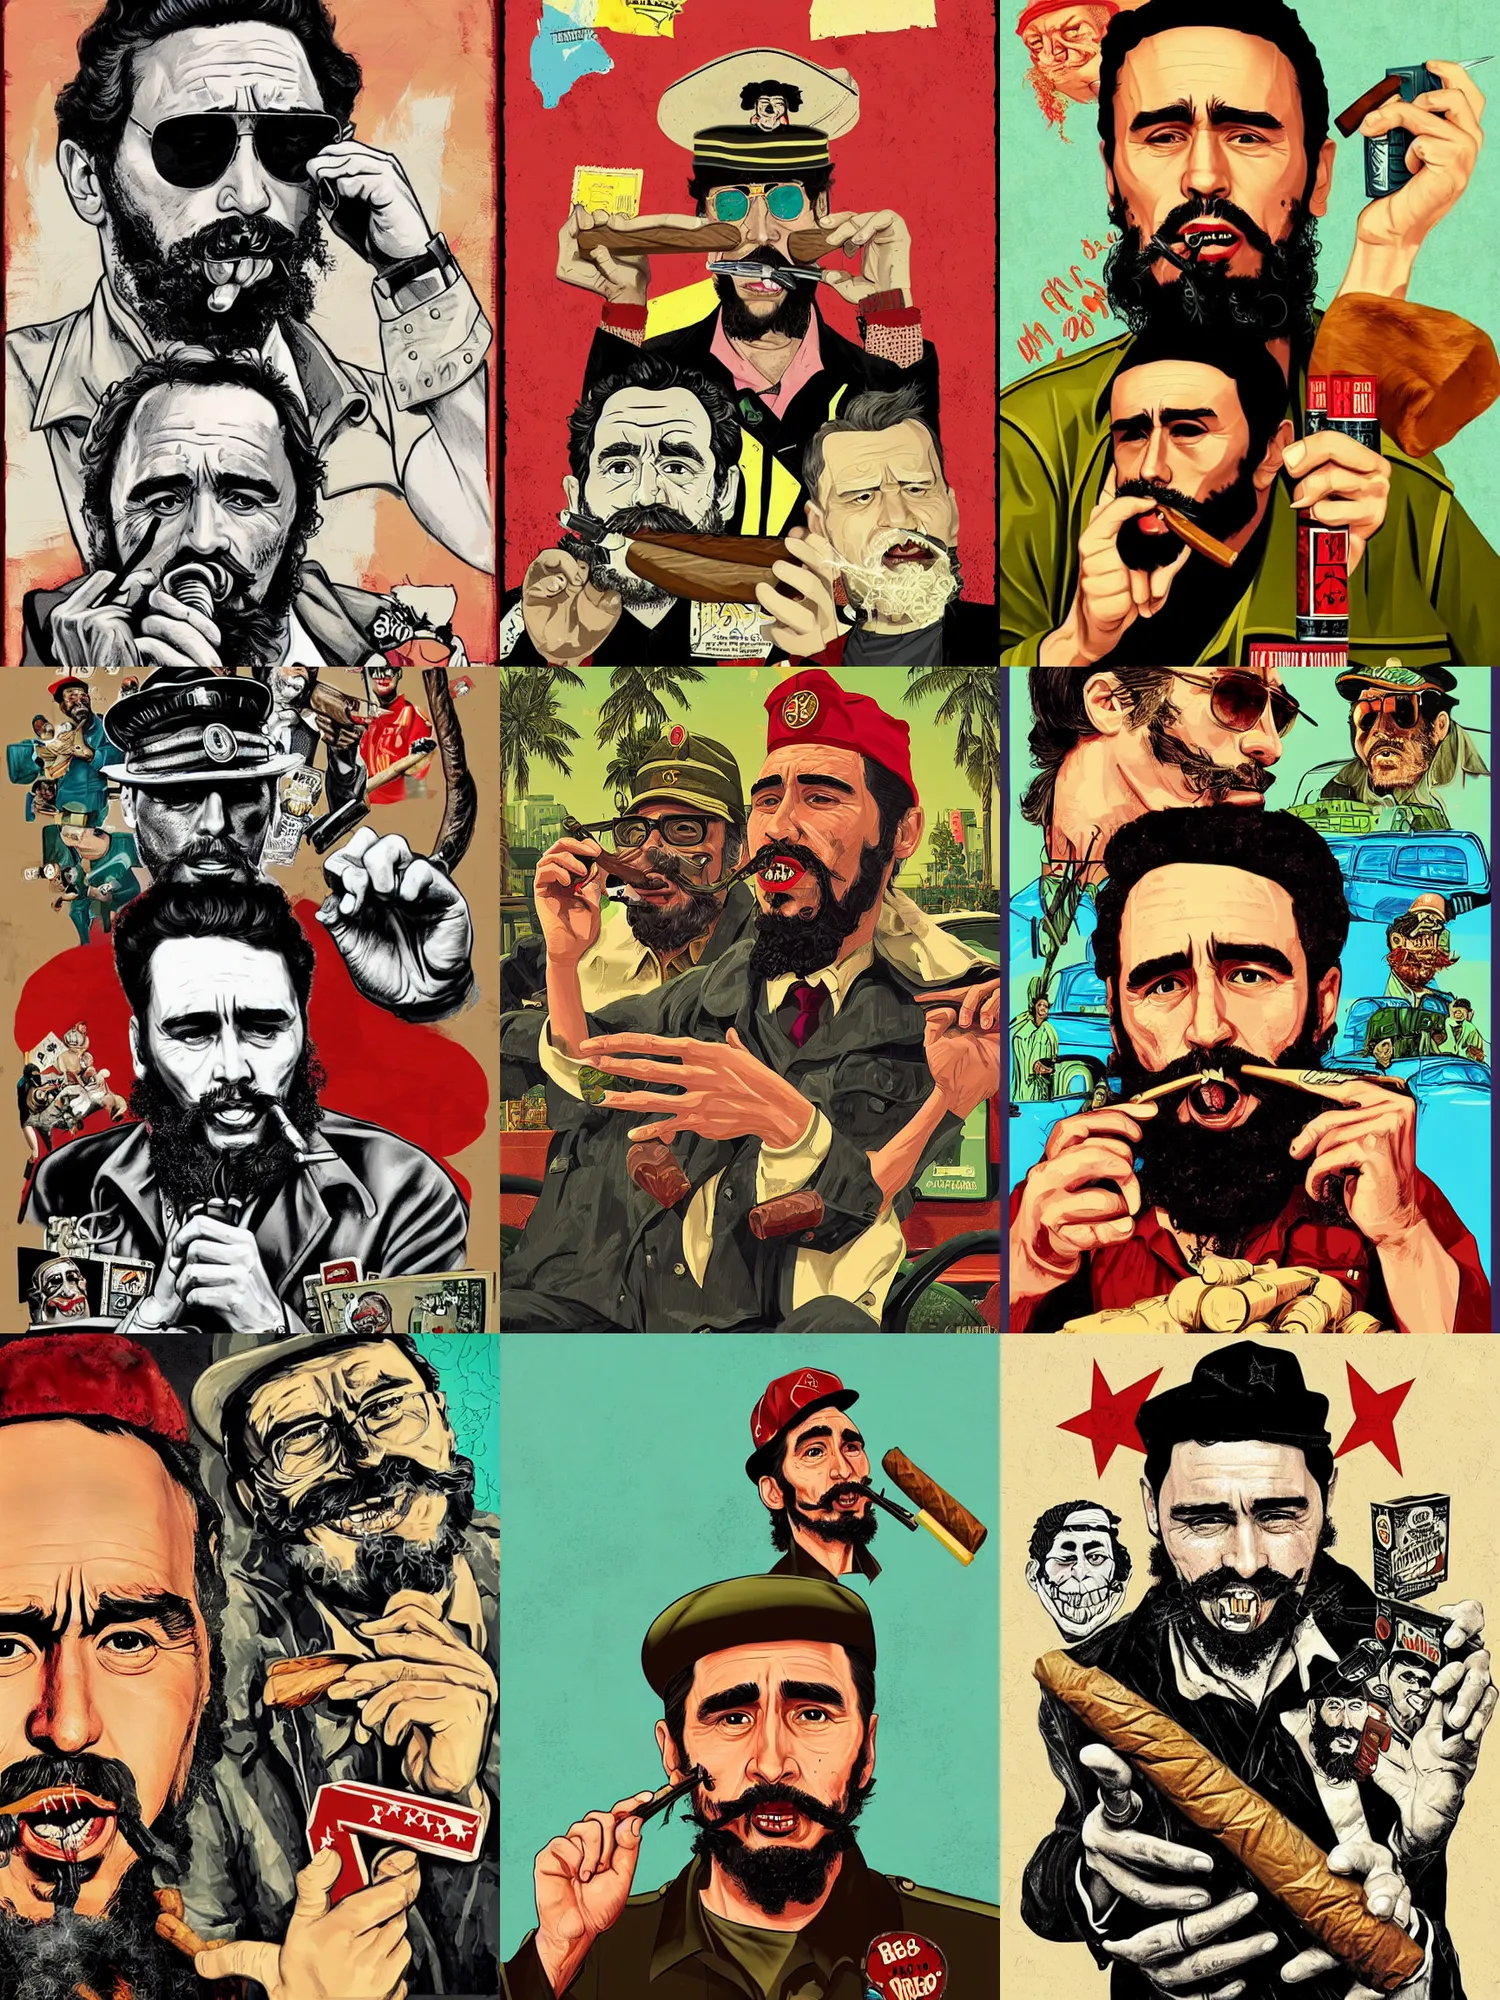 Prompt: James Franco as Fidel Castro smoking a large cigar, lowbrow, pop surrealism art style, contemporary art illustration, iintricate, 8K detail post-processing, in the style of Big Daddy Roth artwork, Grand Theft Auto character design aesthetic